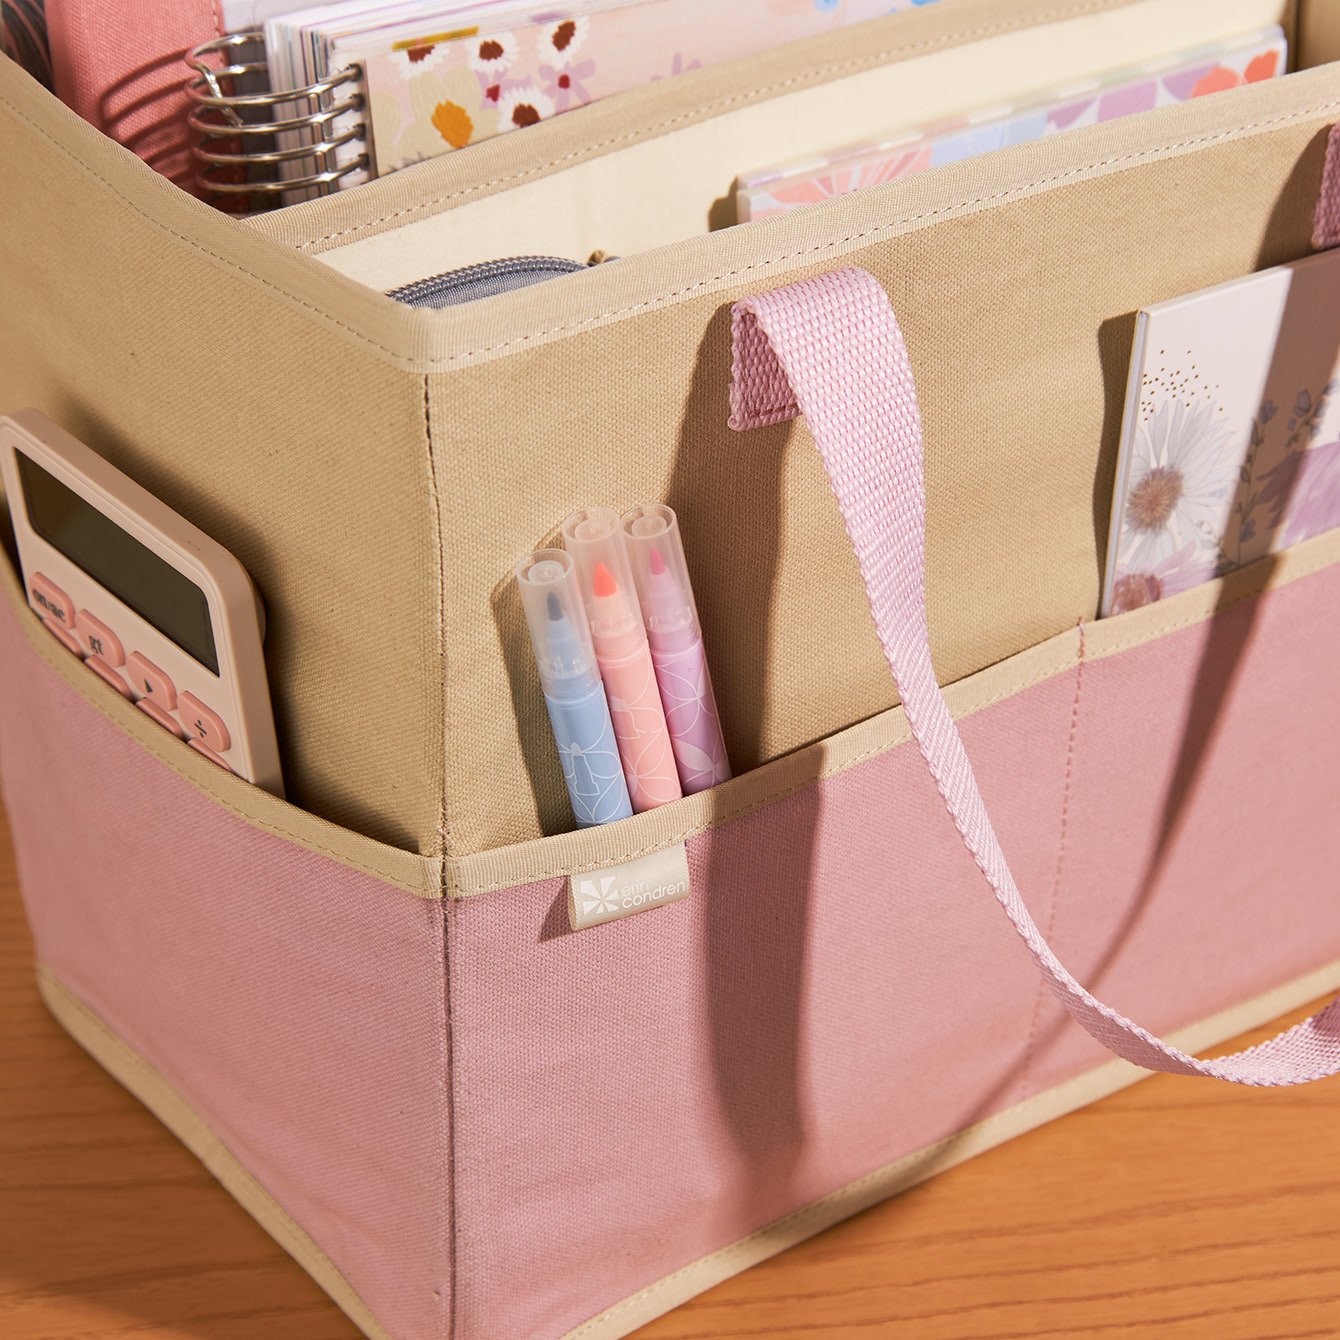 https://images.erincondren.com/Accessories_Aug-Dec_2023/August_Accessories/Lilac_Small_Organizer_Caddy/SmallCaddy_lilac_05.jpg?width=1340